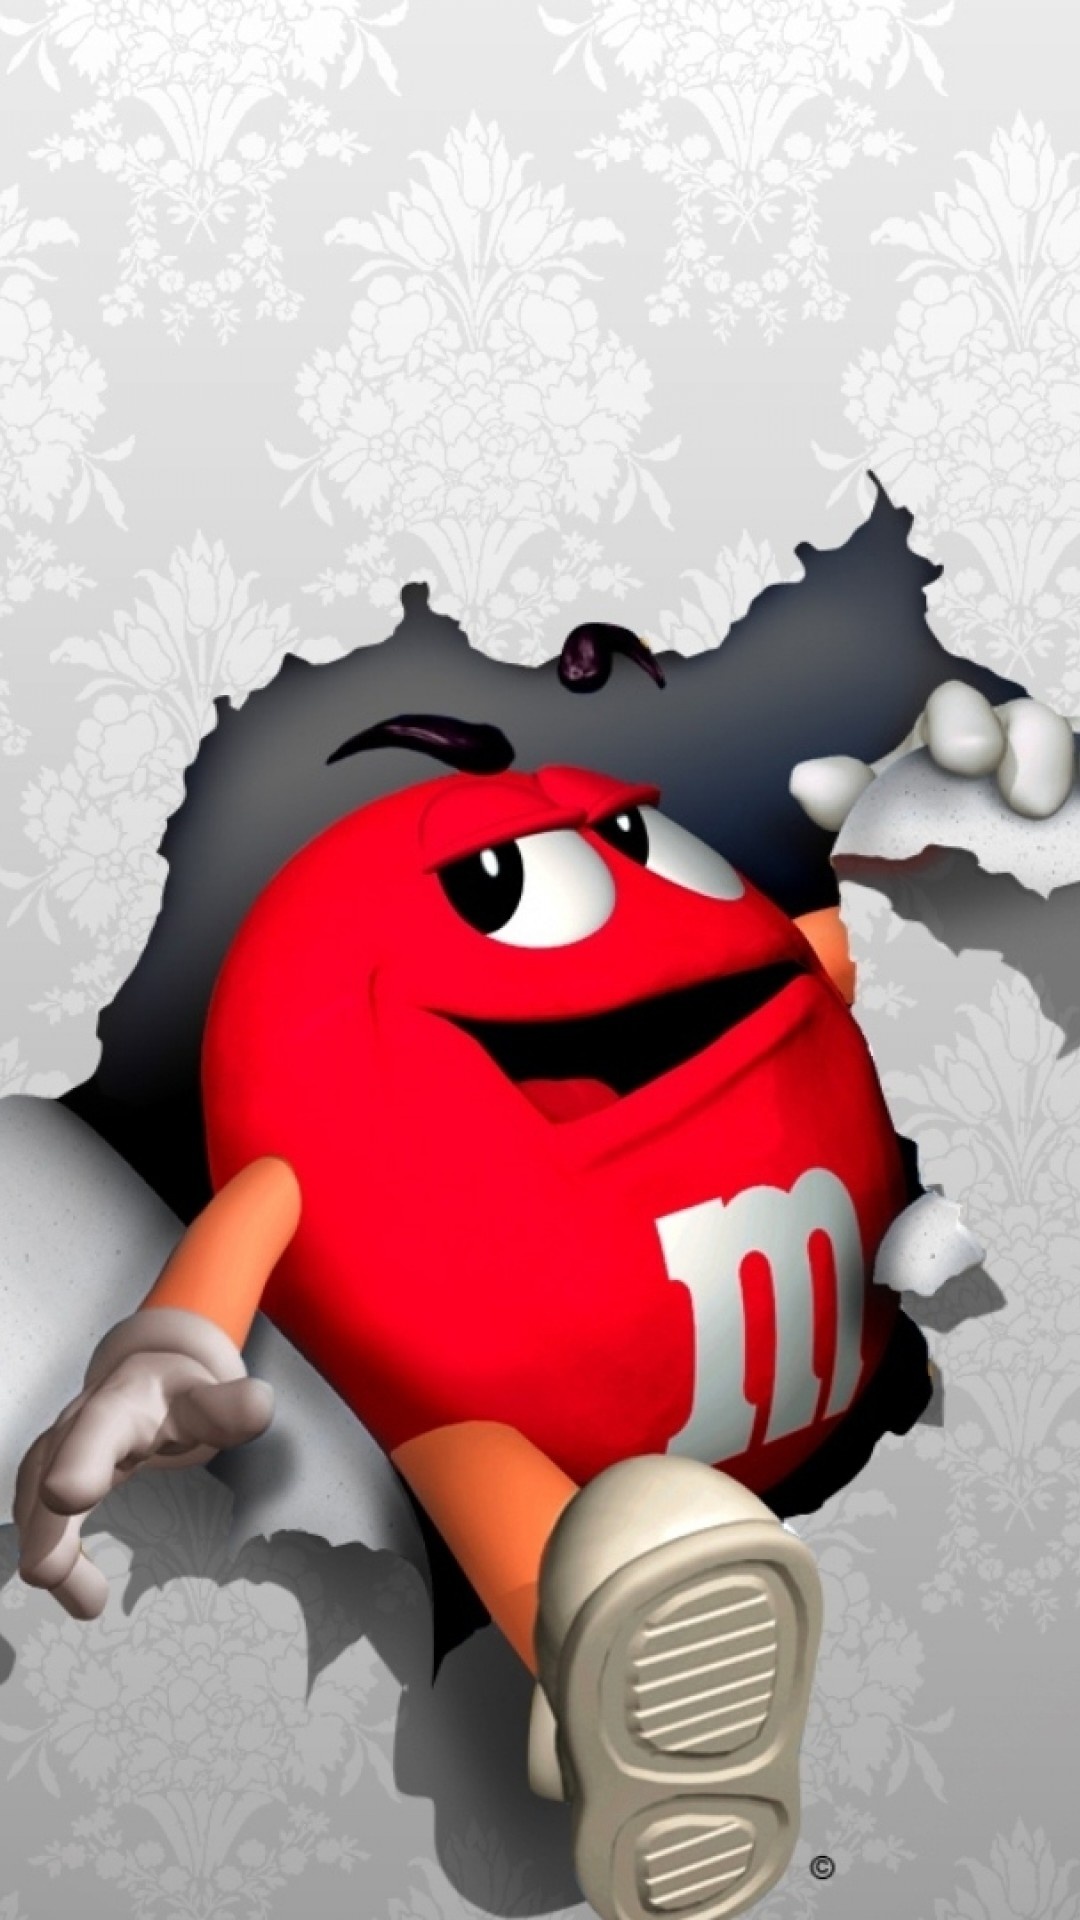 M&M chocolate, Delicious wallpaper, Irresistible sweetness, Mobile and desktop, 1080x1920 Full HD Handy